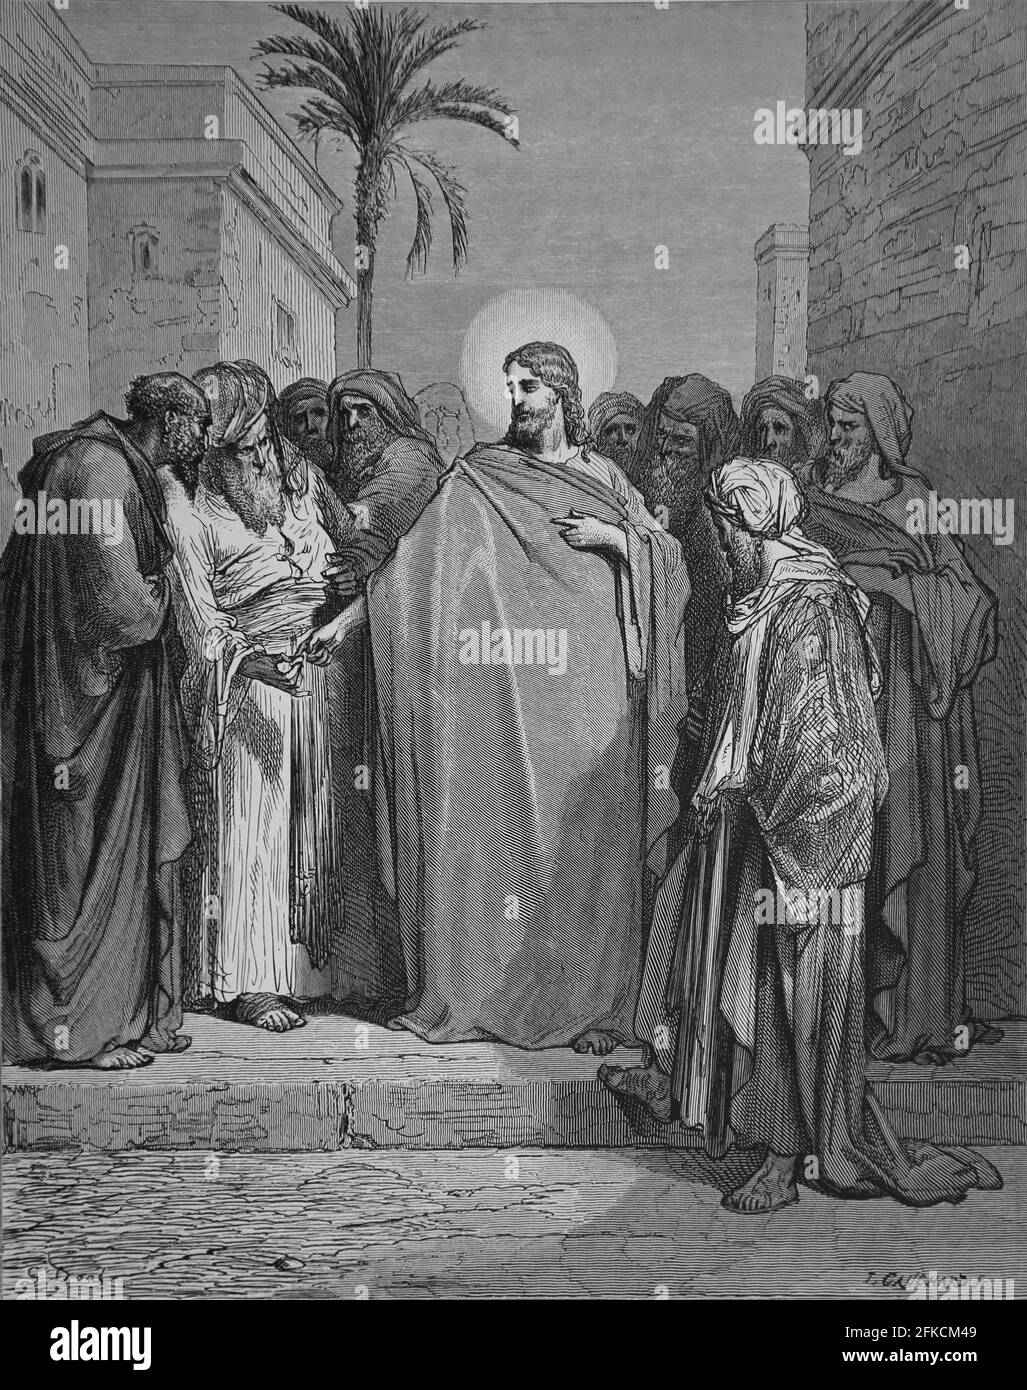 Christ and the tribute money. (Matthew 22:21). Engraving. Bible Illustration by Gustave Dore. 19th century. Stock Photo